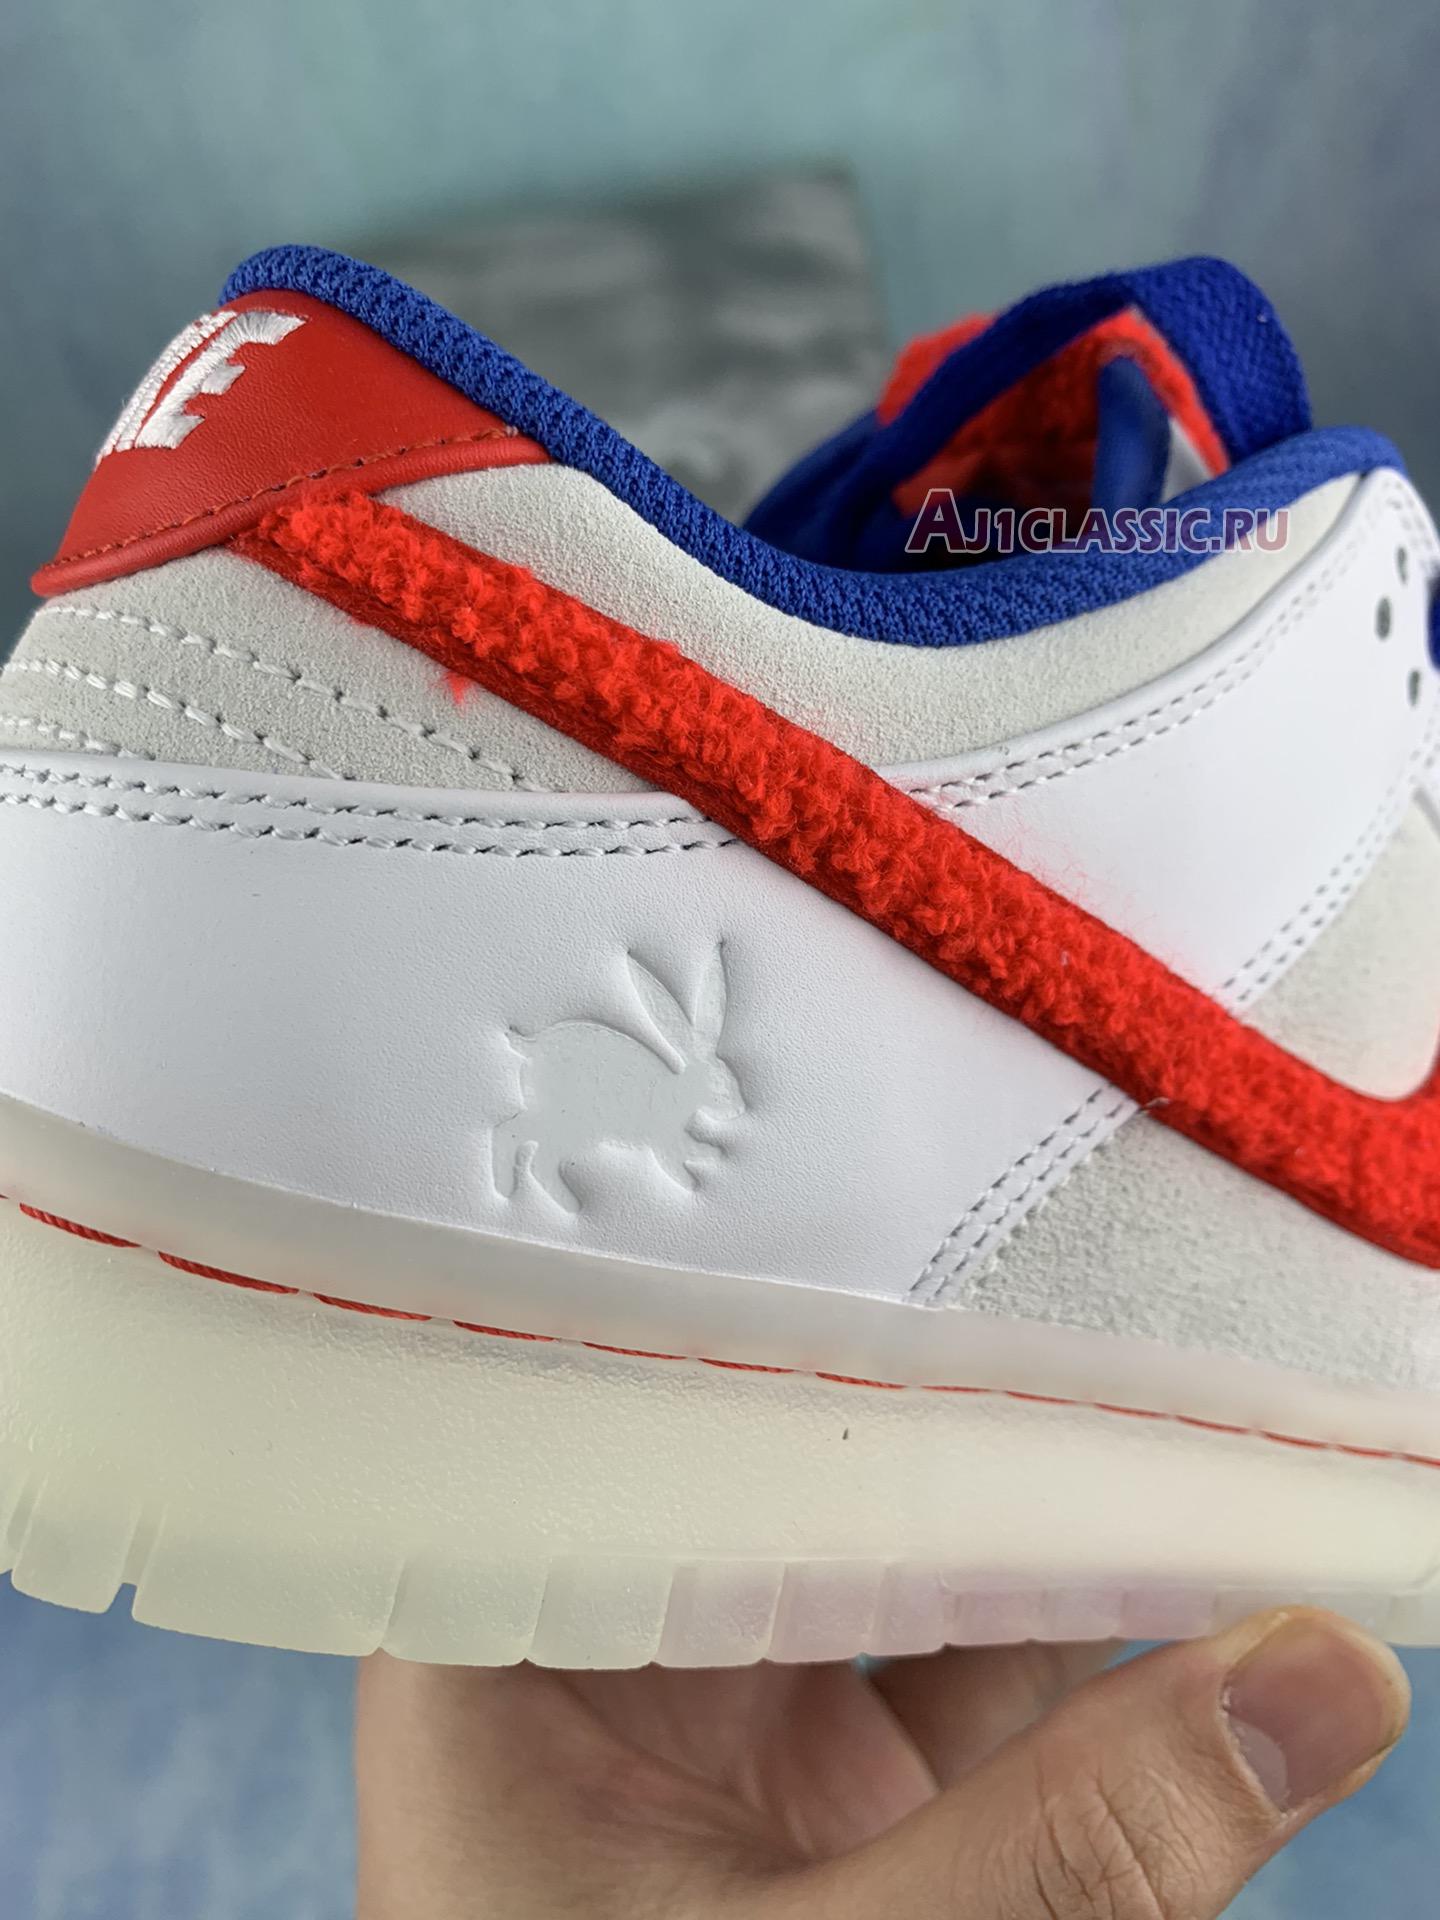 Nike Dunk Low "Year of the Rabbit - White Rabbit Candy" FD4203-161